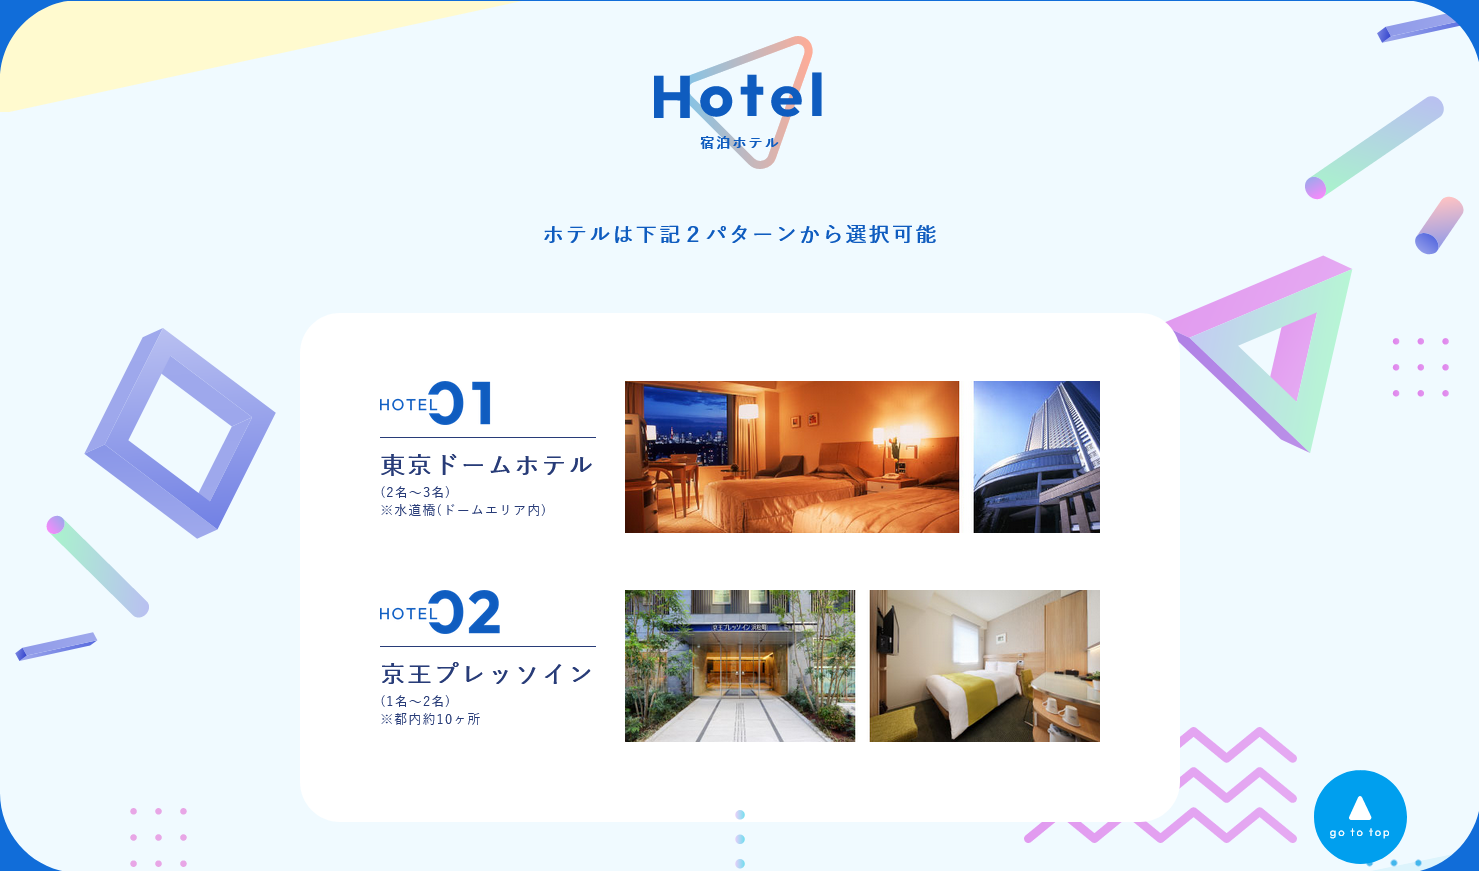 hololive-city-hololive-airline-hotel.png